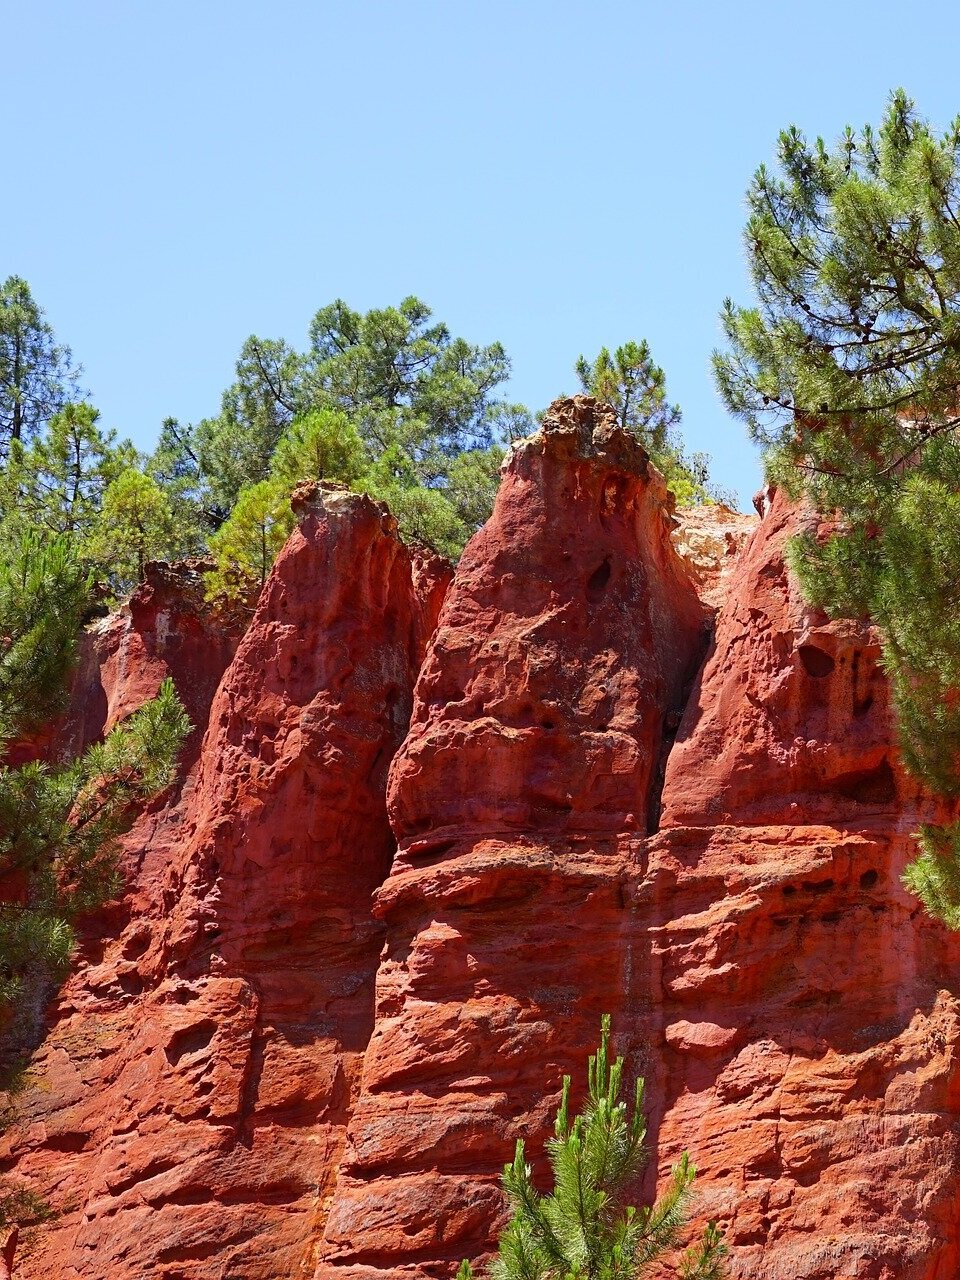 Company seminars and teambuilding in the heart of nature, discovering the ochres of Roussillon